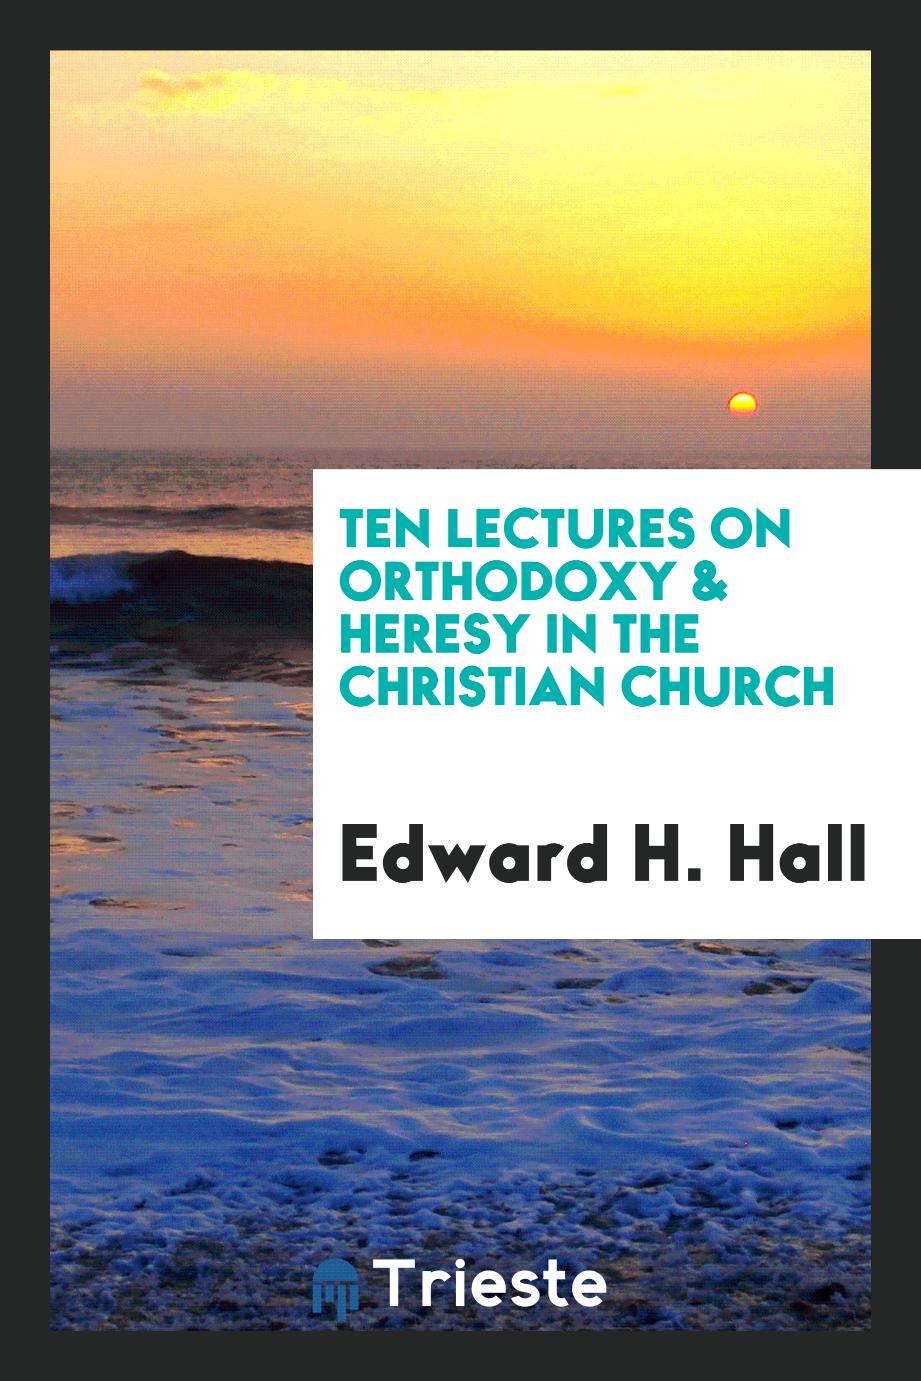 Ten lectures on orthodoxy & heresy in the Christian church